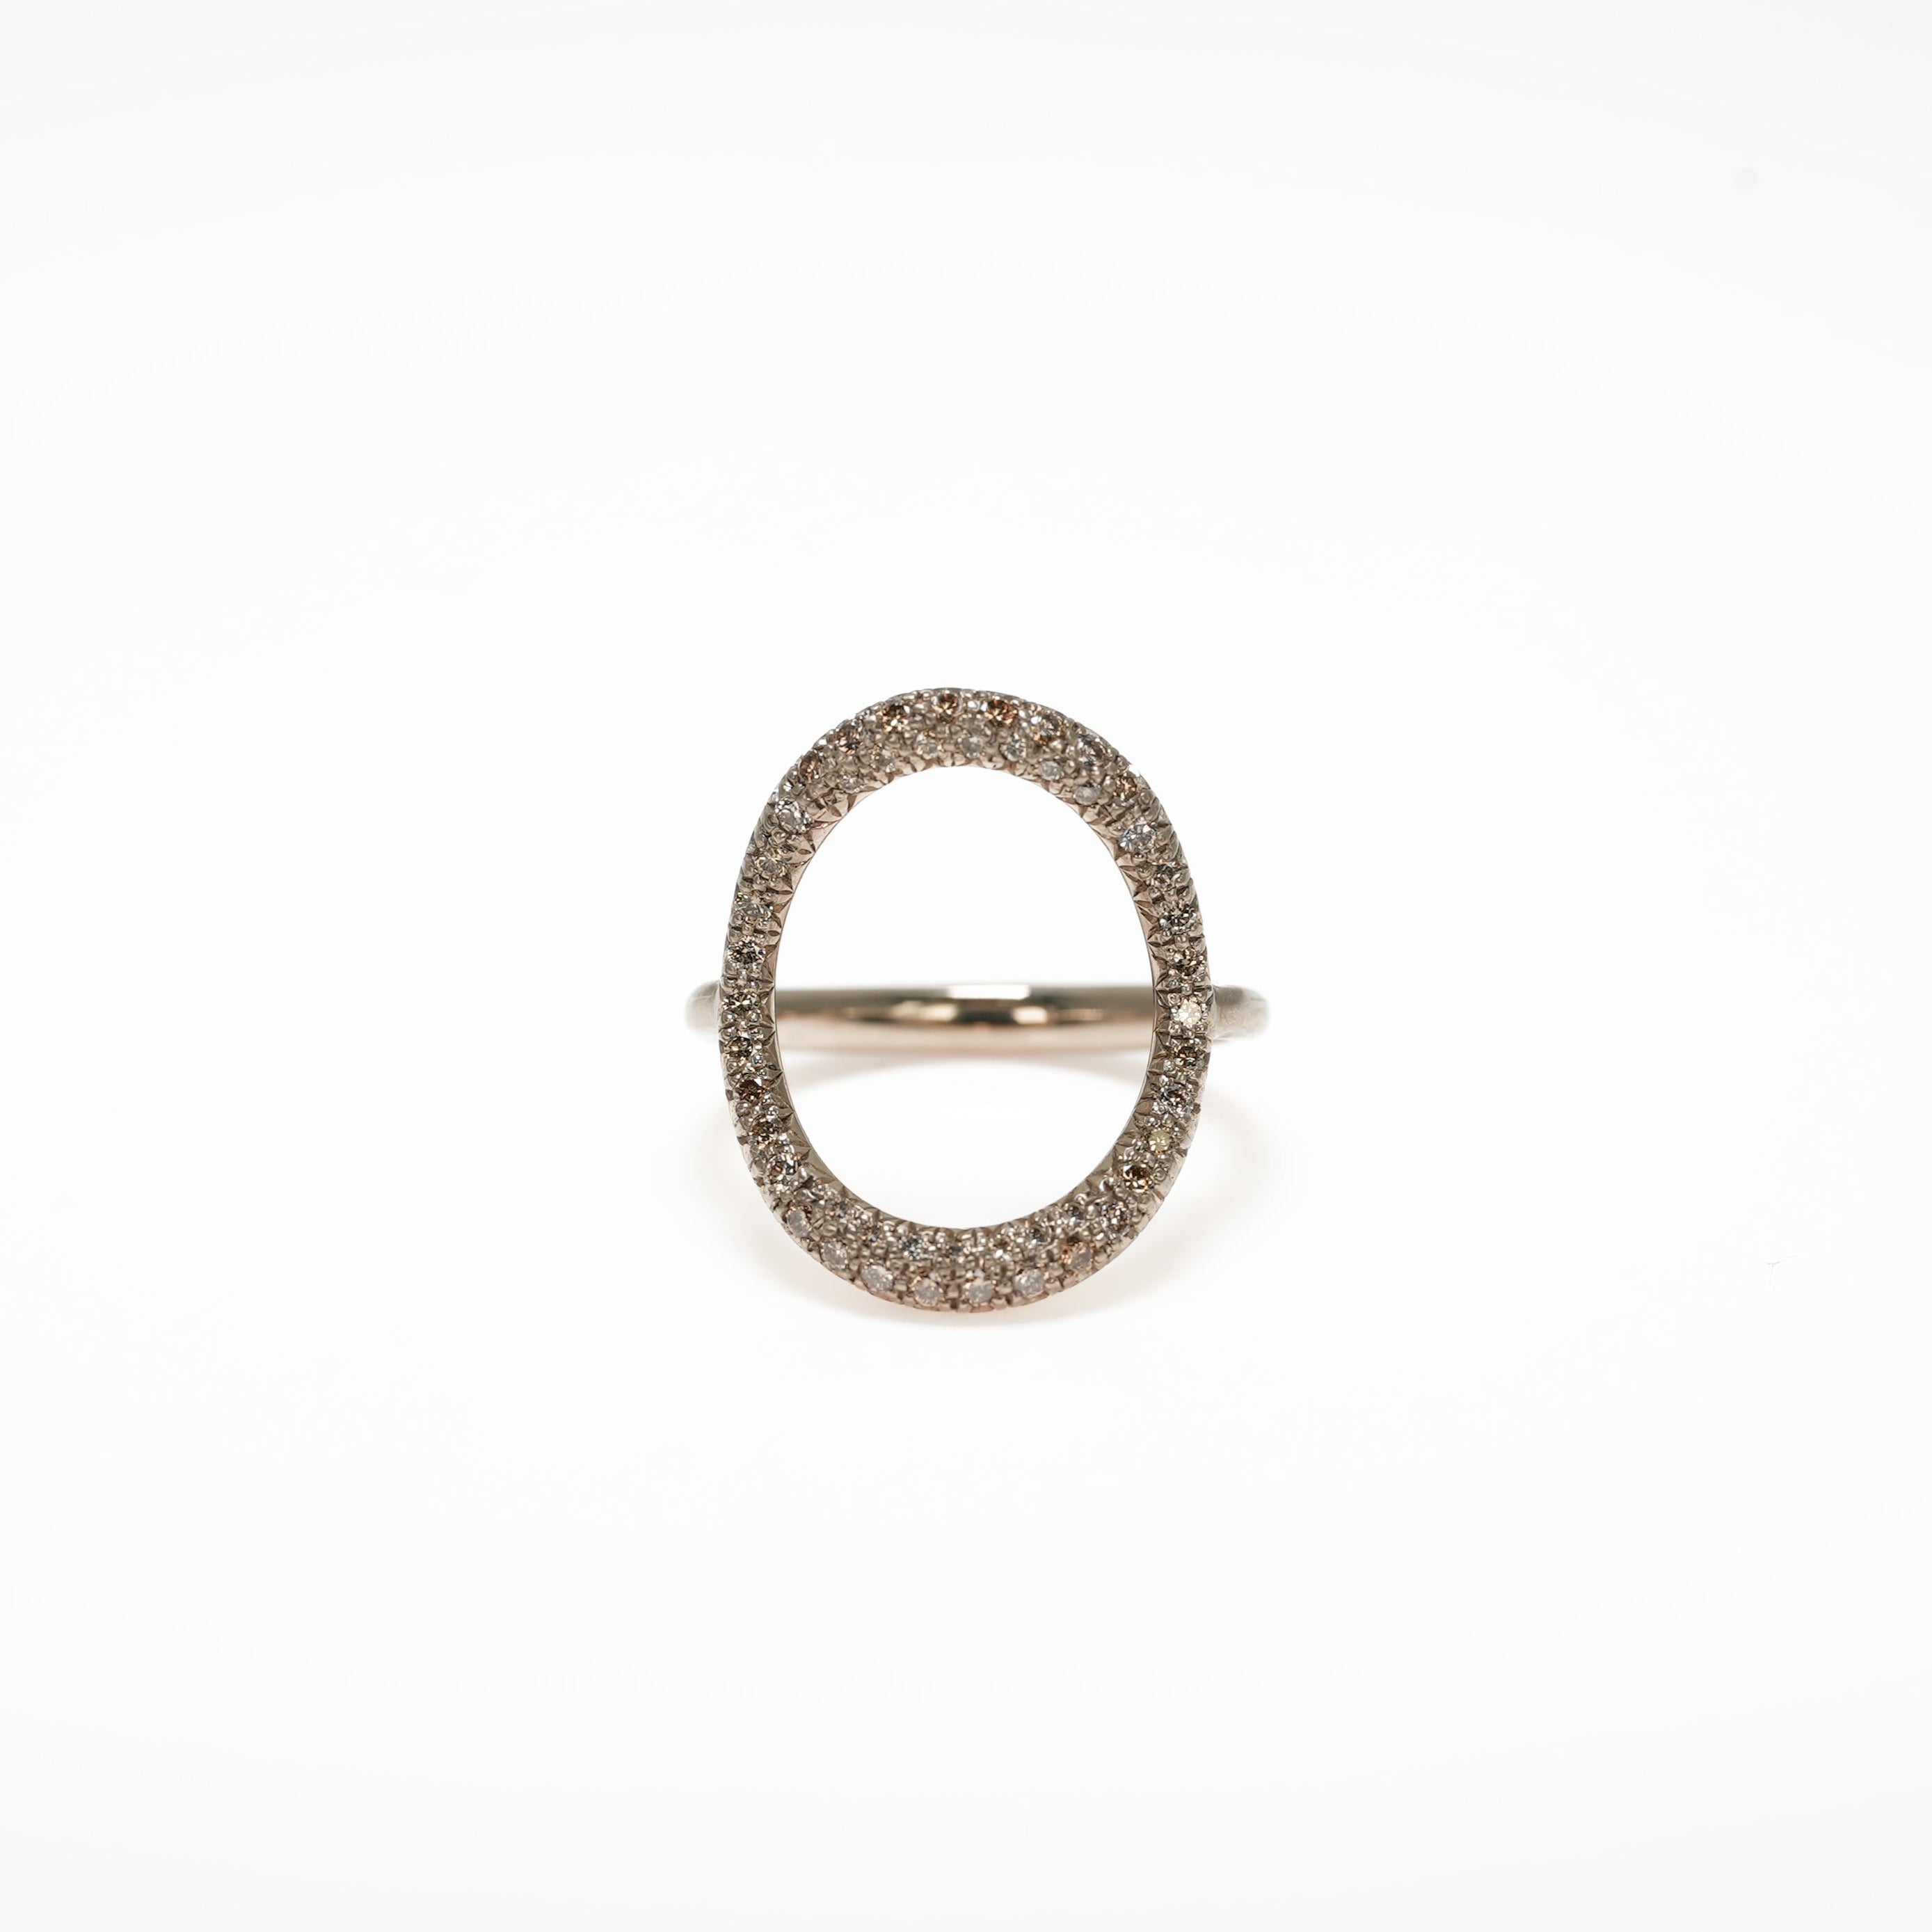 HUMETE ’CLASSIC’ OVAL RING [et-R106]